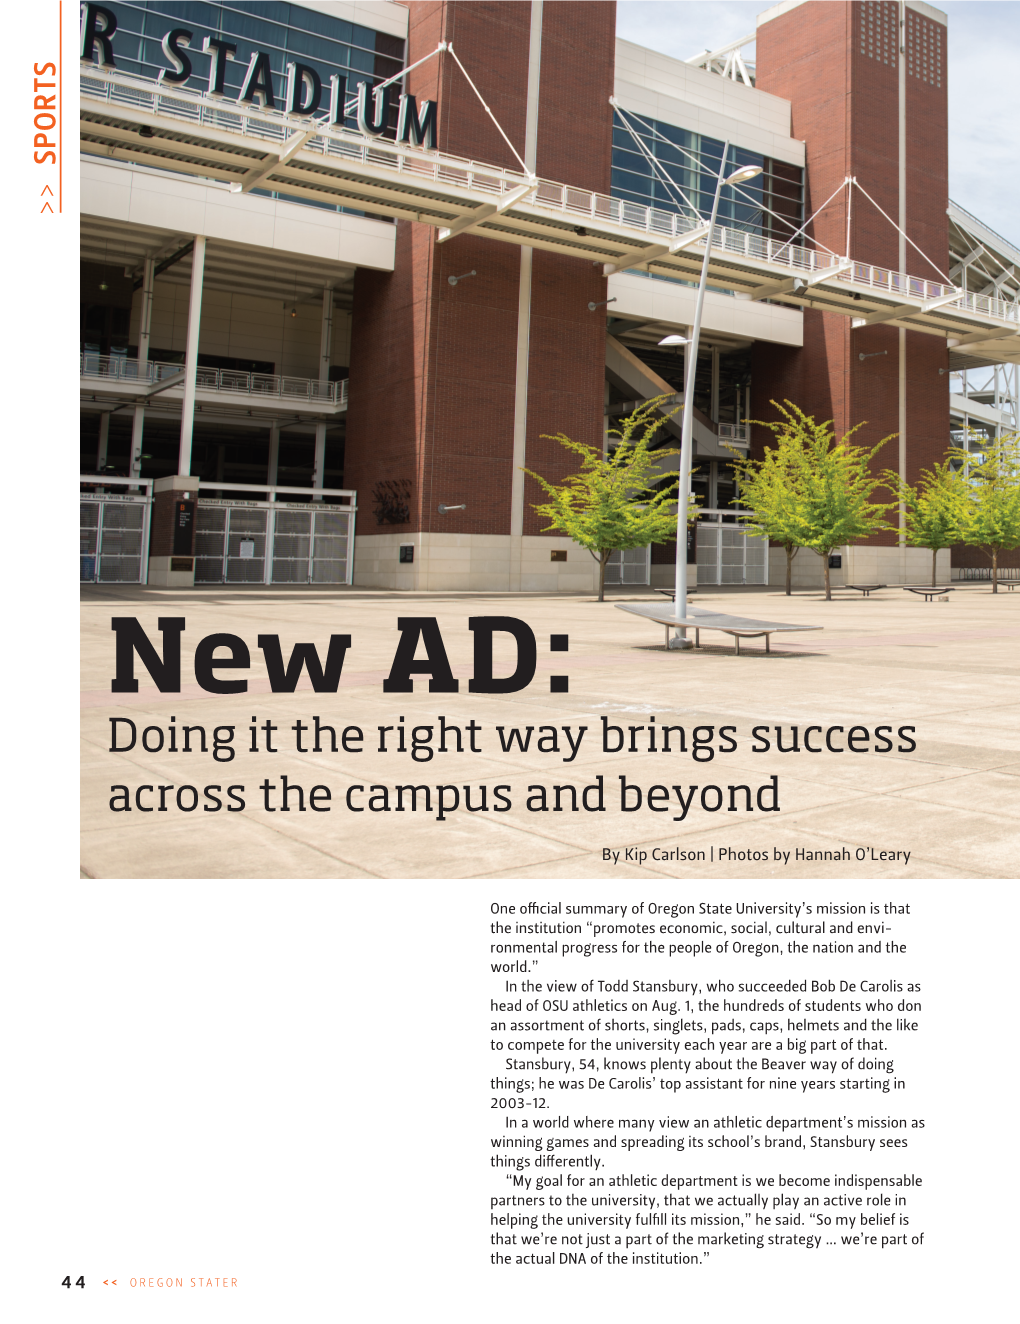 New AD: Doing It the Right Way Brings Success Across the Campus and Beyond